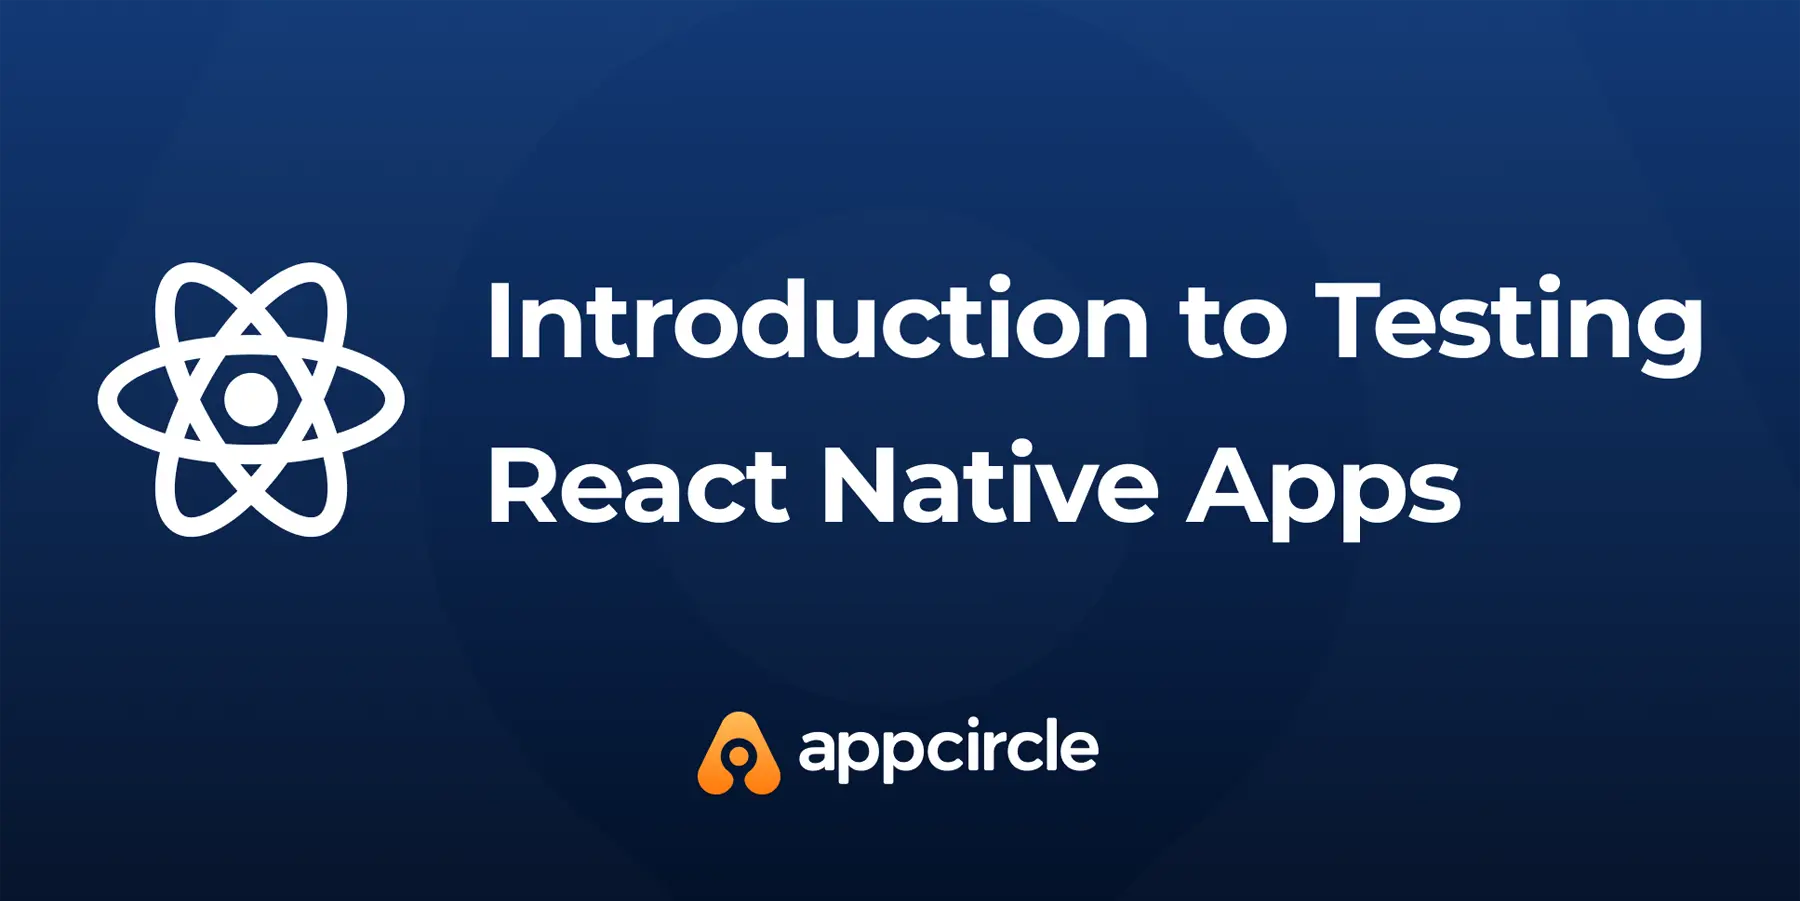 Introduction to Testing React Native Apps